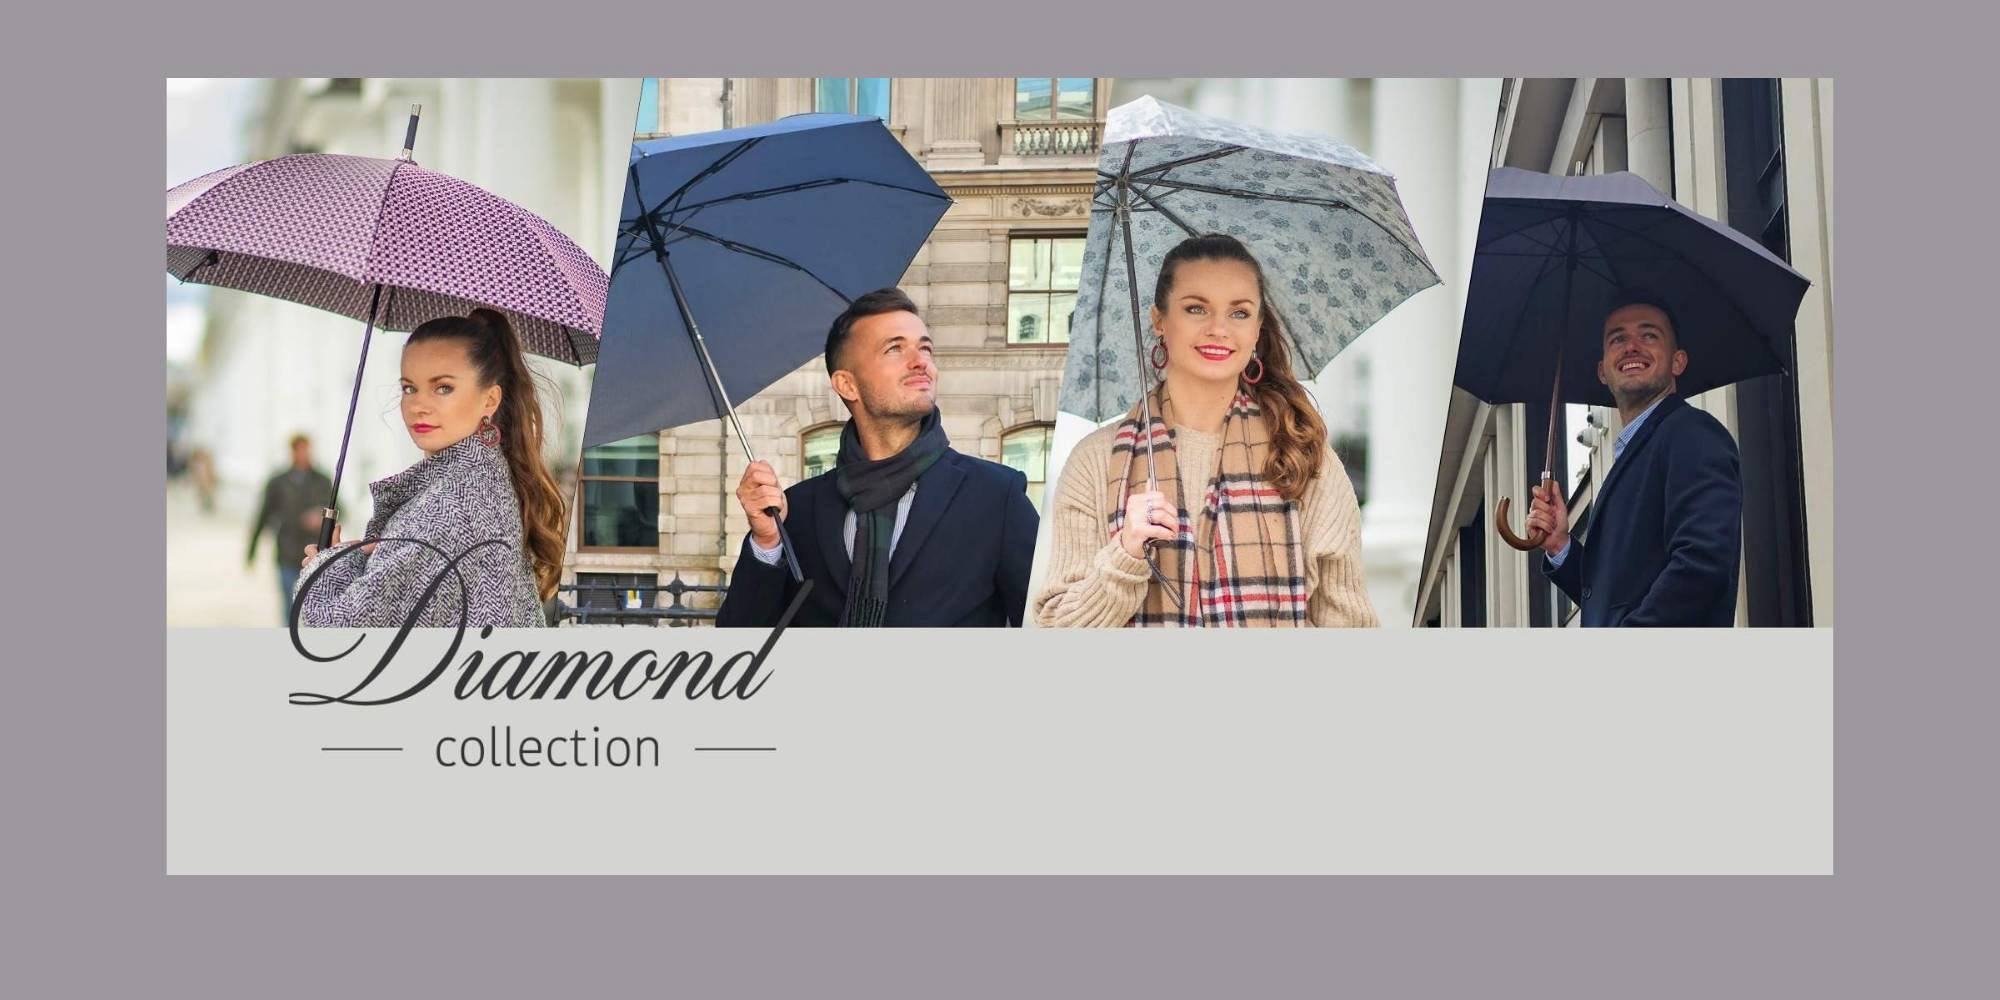 The Diamond Collection by Fulton